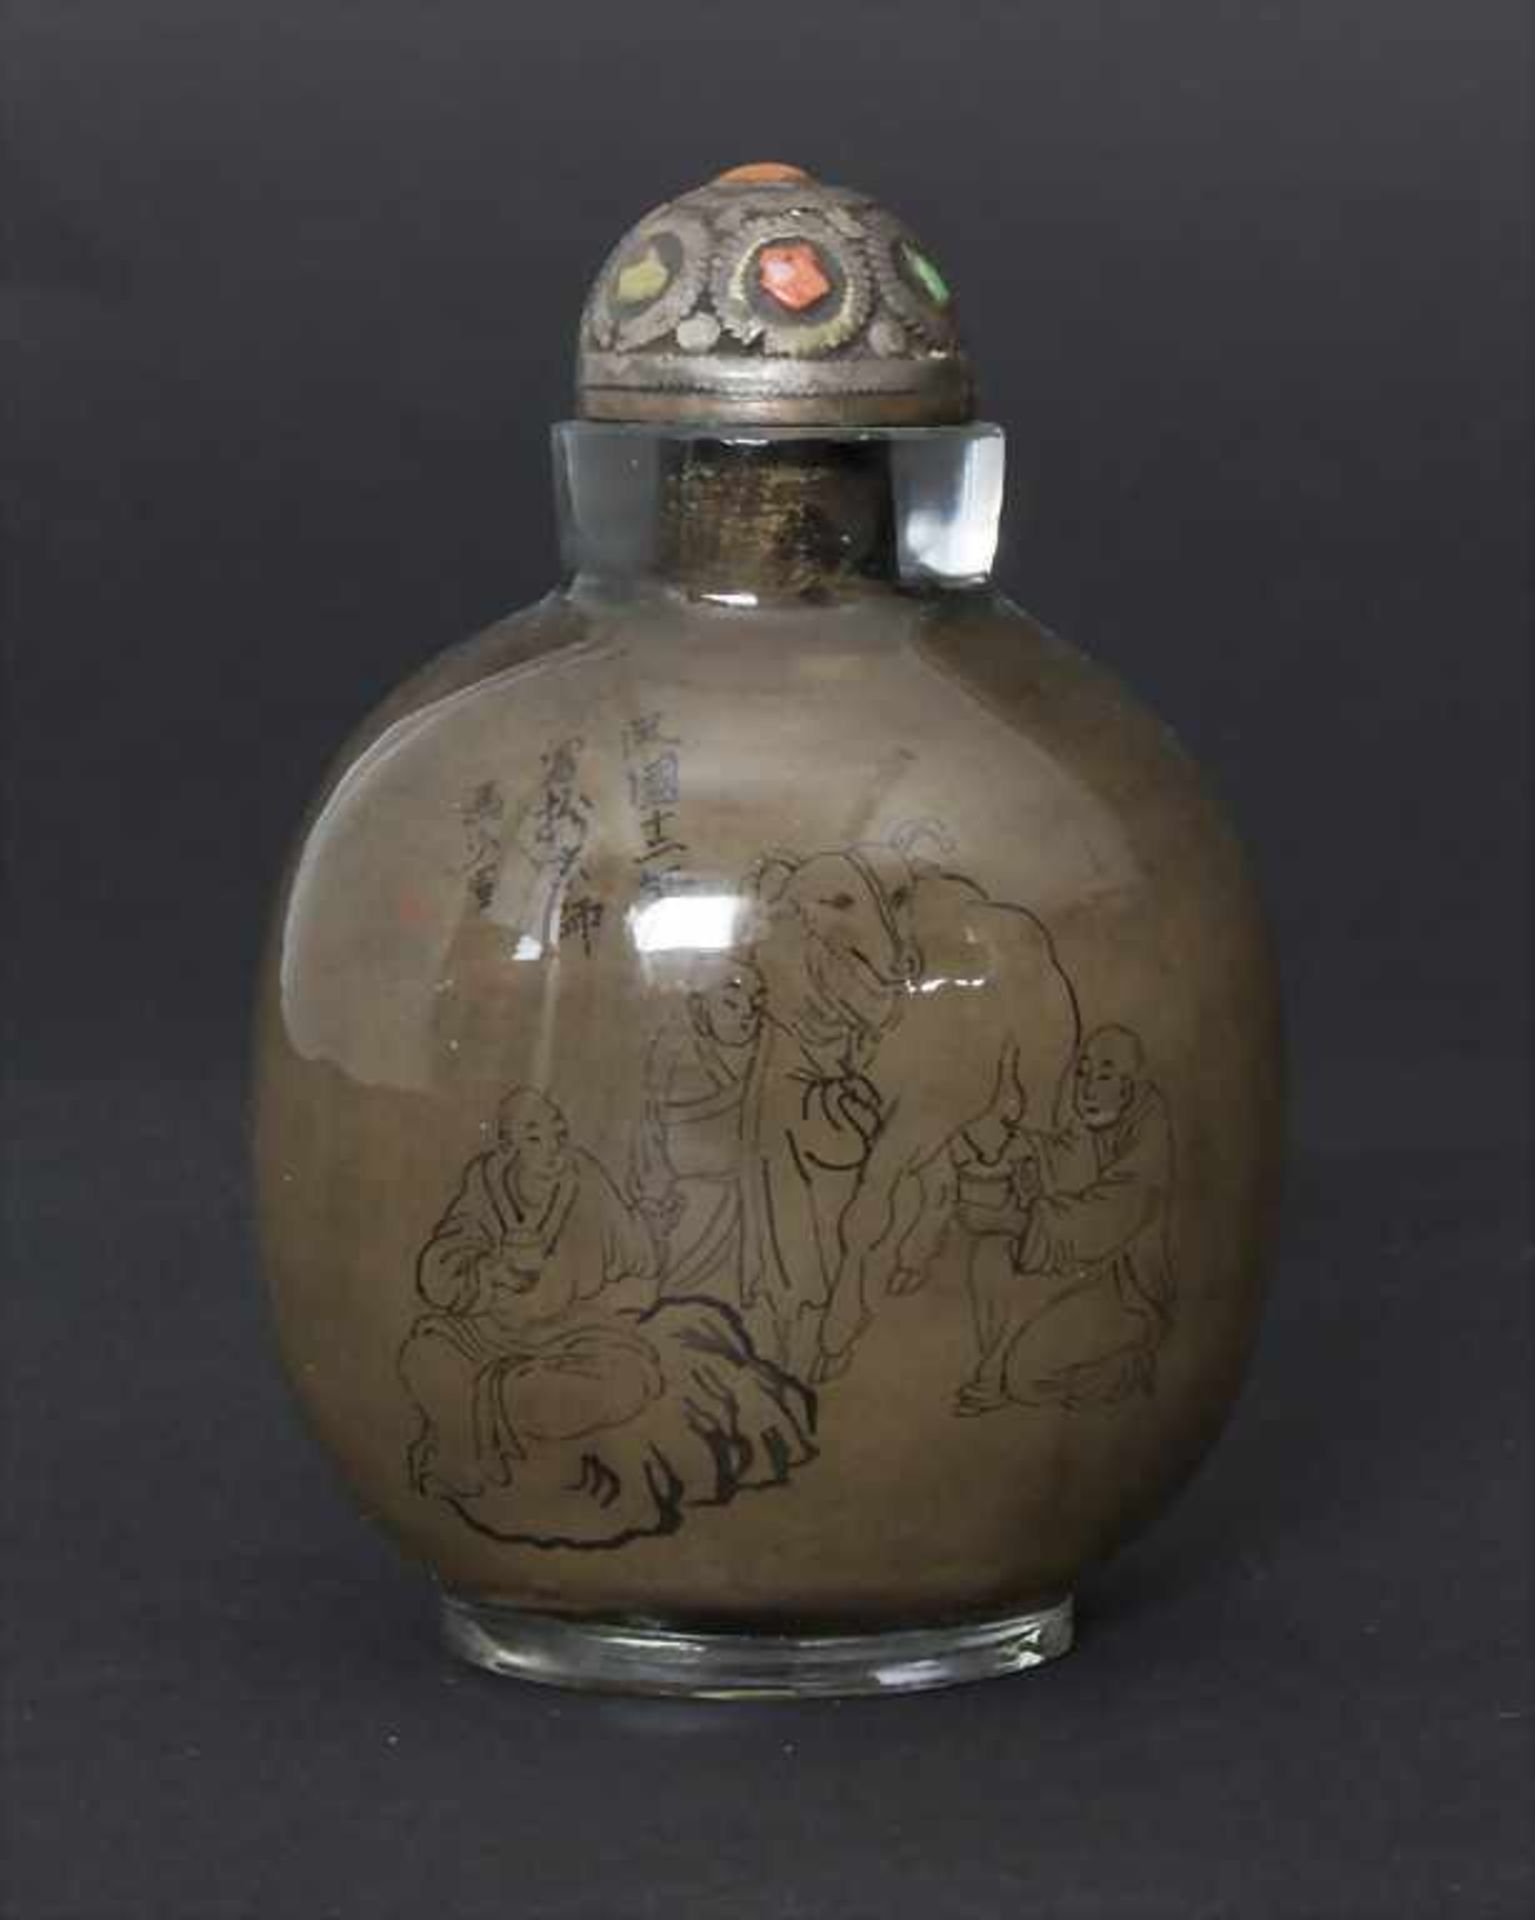 Snuffbottle mit Tuschemalerei 'Mönche' / A snuff bottle with ink drawings 'monks', China, um